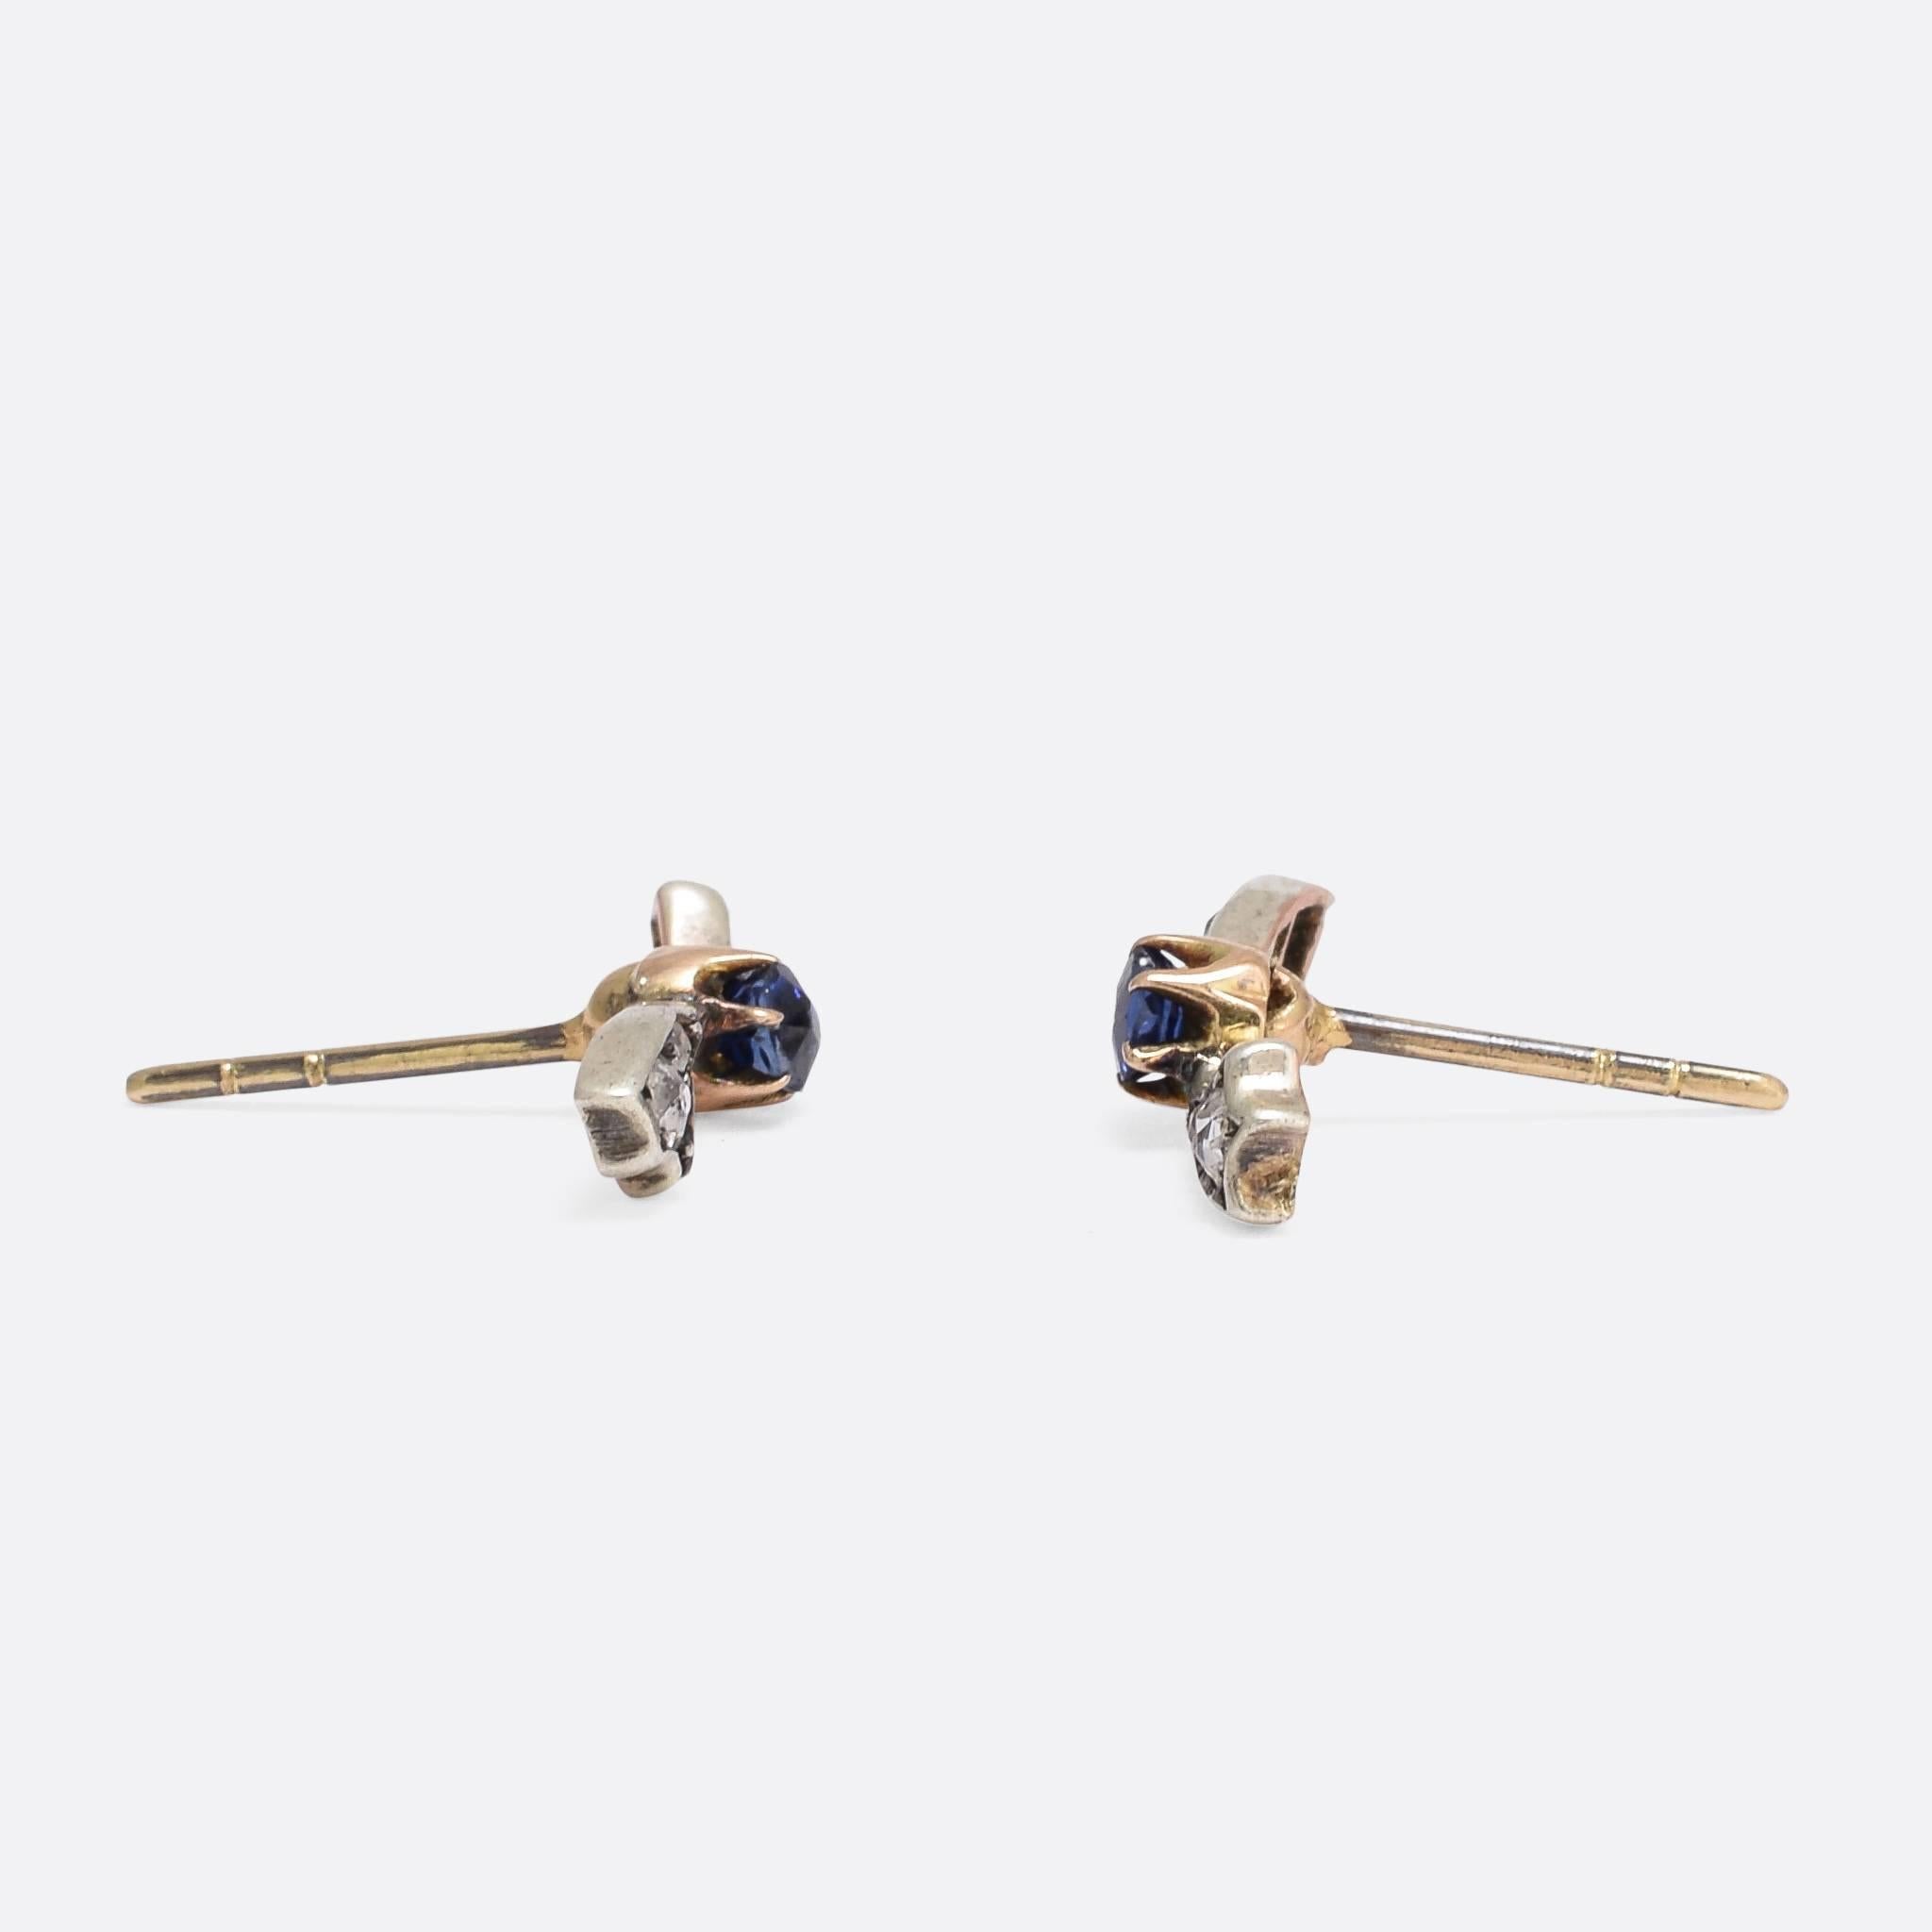 We've created this attractive pair of Stud Earrings from an Edwardian era brooch. They're set with diamonds and vivid lab-grown sapphires - of exceptional colour. They measure 1.8cm long, modelled in 9k gold and silver with a lovely antique patina.